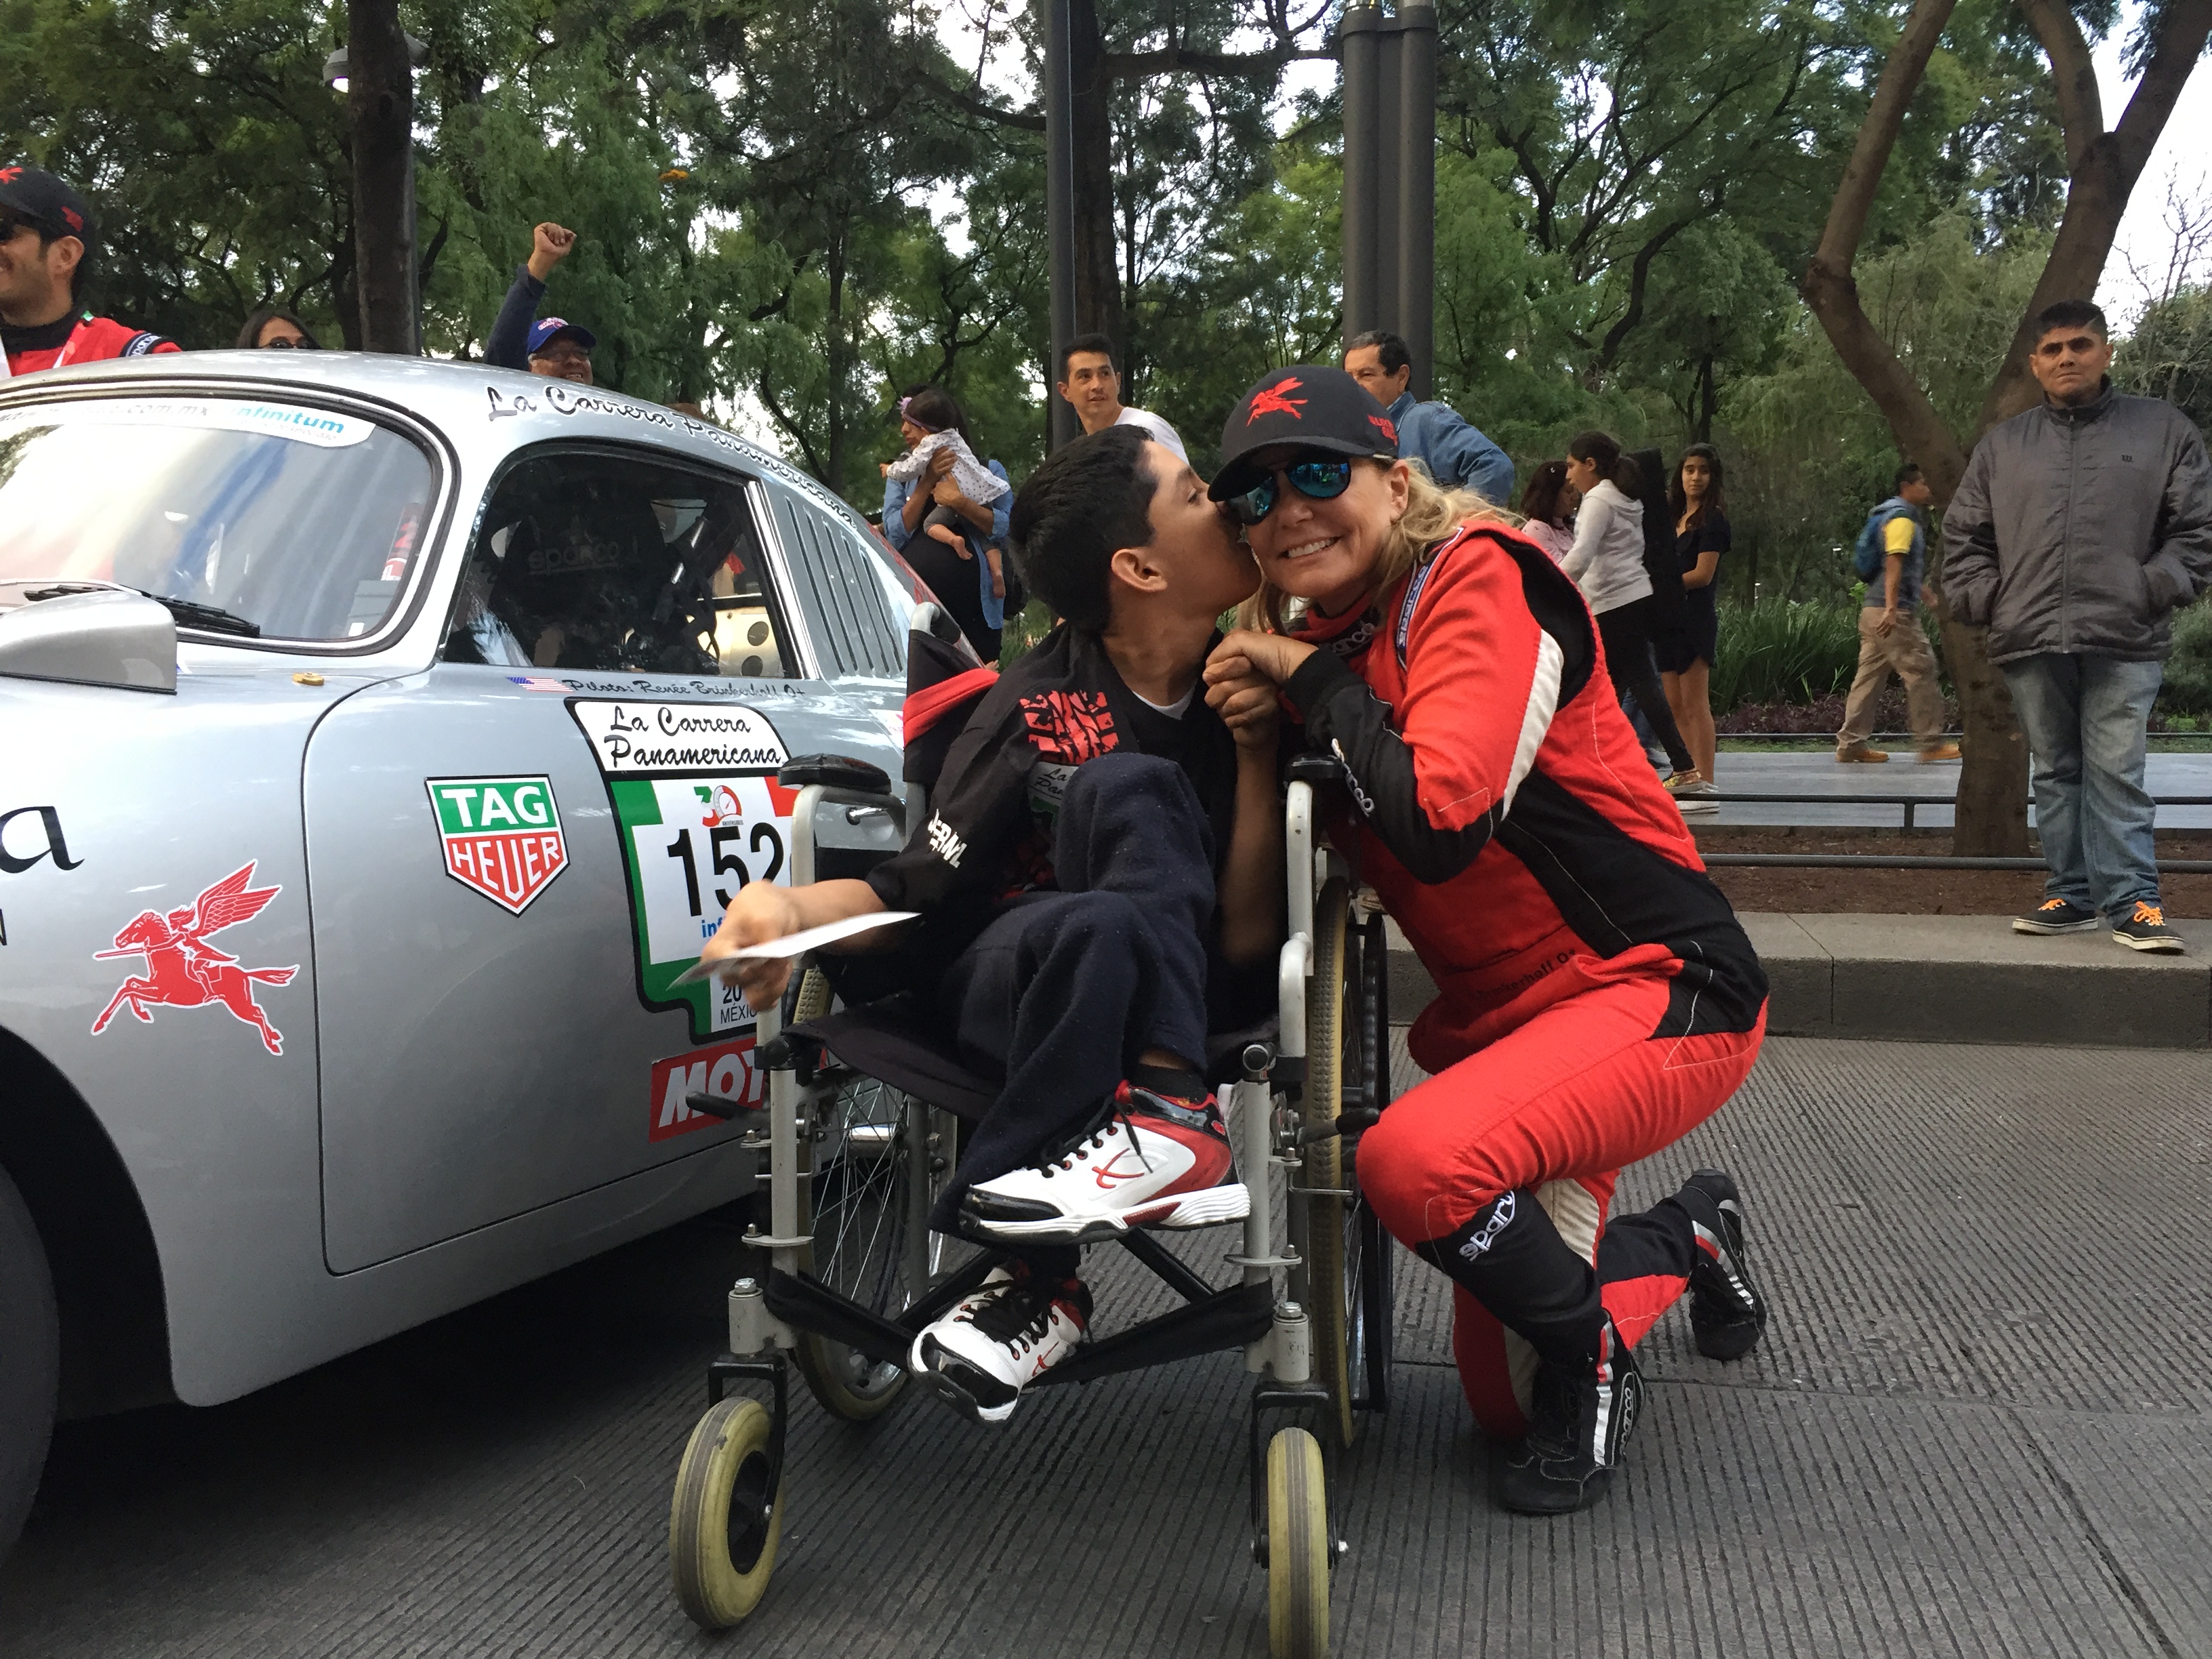 Renee taking the time to speak with racing fans during the 2015 La Carrera Panamericana rally in Mexico., Photo: Valkyrie Racing